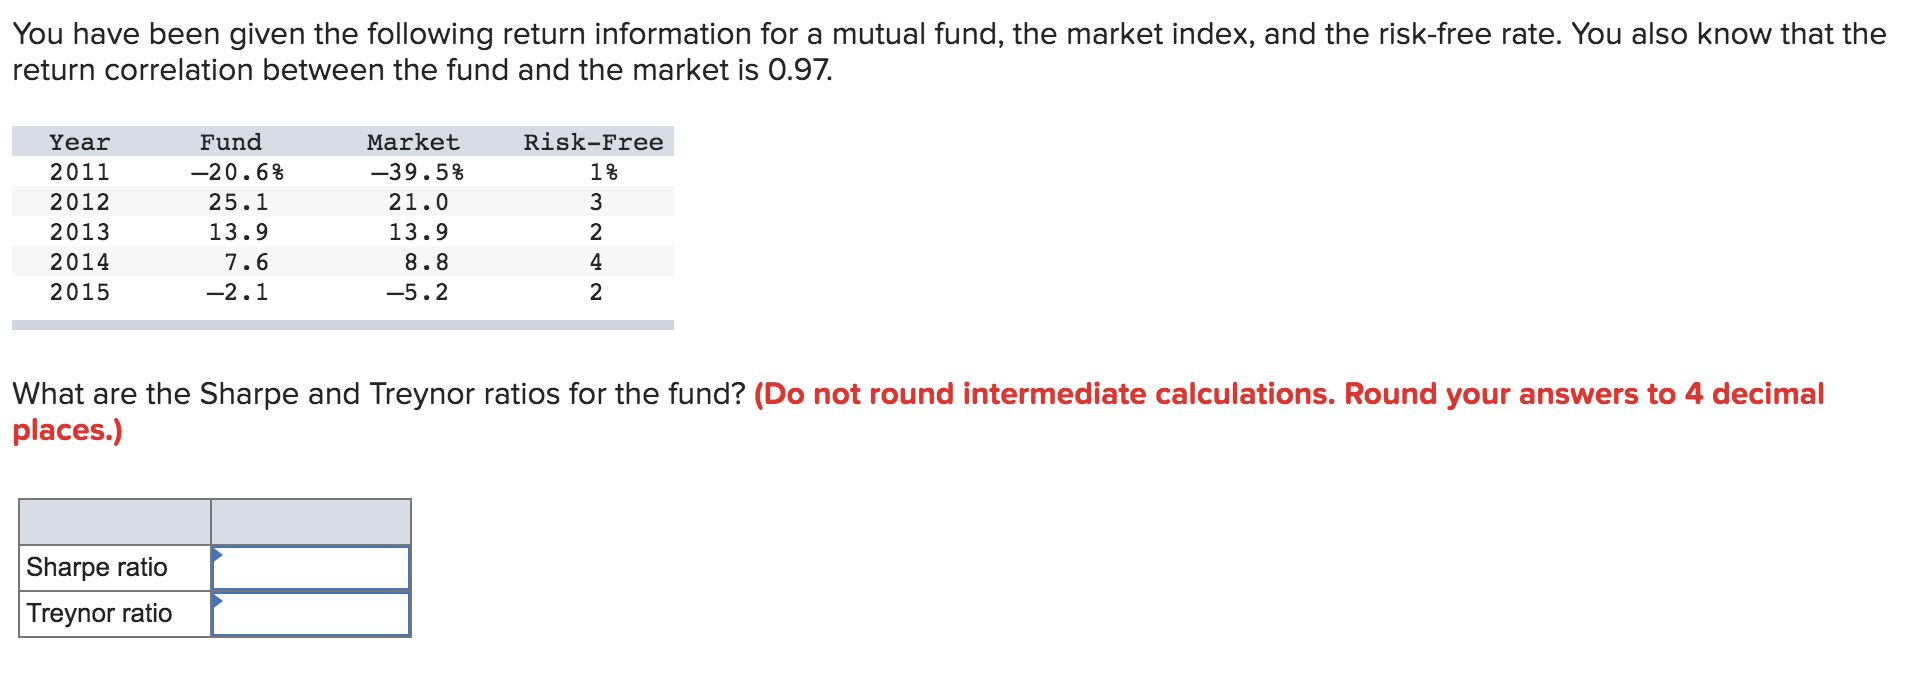 You have been given the following return information for a mutual fund, the market index, and the risk-free rate. You also know that the
return correlation between the fund and the market is 0.97.
1TTT
Fund
Risk-Free
Market
Year
2011
-20.6%
-39.5%
2012
25.1
21.0
3
2013
13.9
13.9
2
2014
7.6
8.8
2015
-2.1
-5.2
2
What are the Sharpe and Treynor ratios for the fund? (Do not round intermediate calculations. Round your answers to 4 decimal
places.)
Sharpe ratio
Treynor ratio
